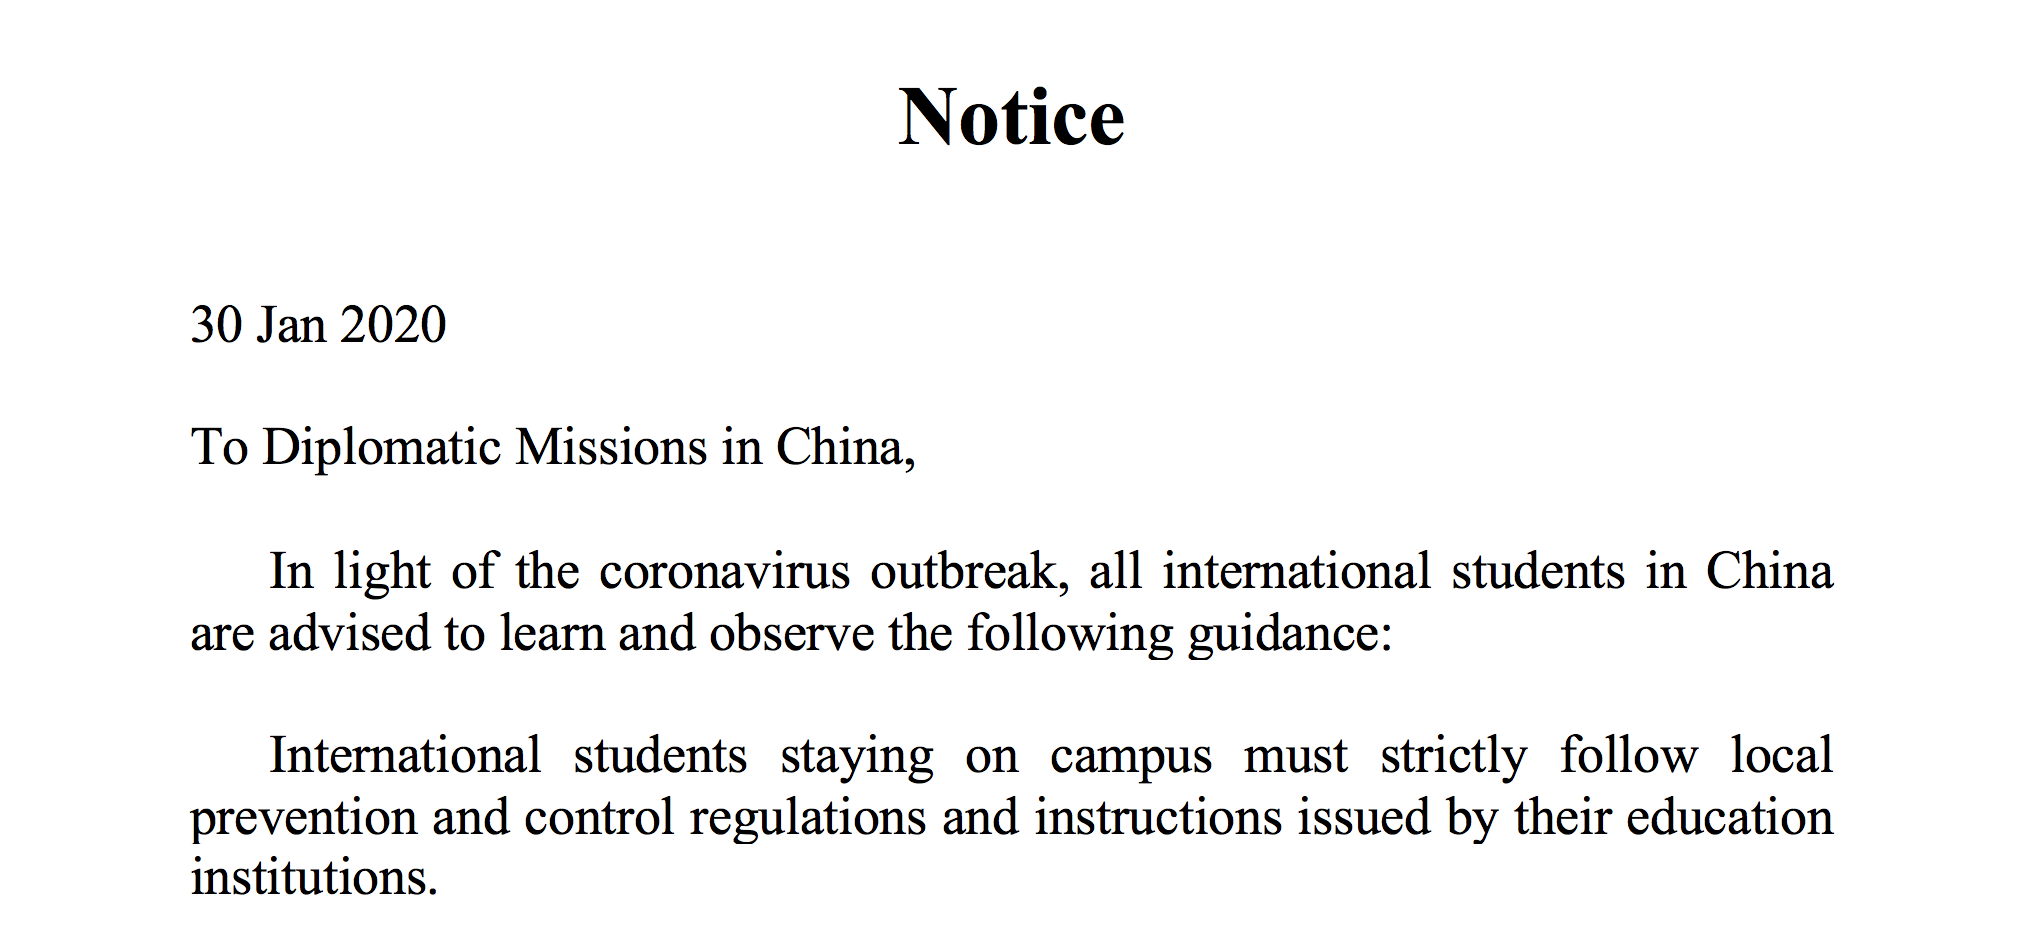 Notice - Office of Foreign Missions of the Chinese Ministry of Foreign Affairs